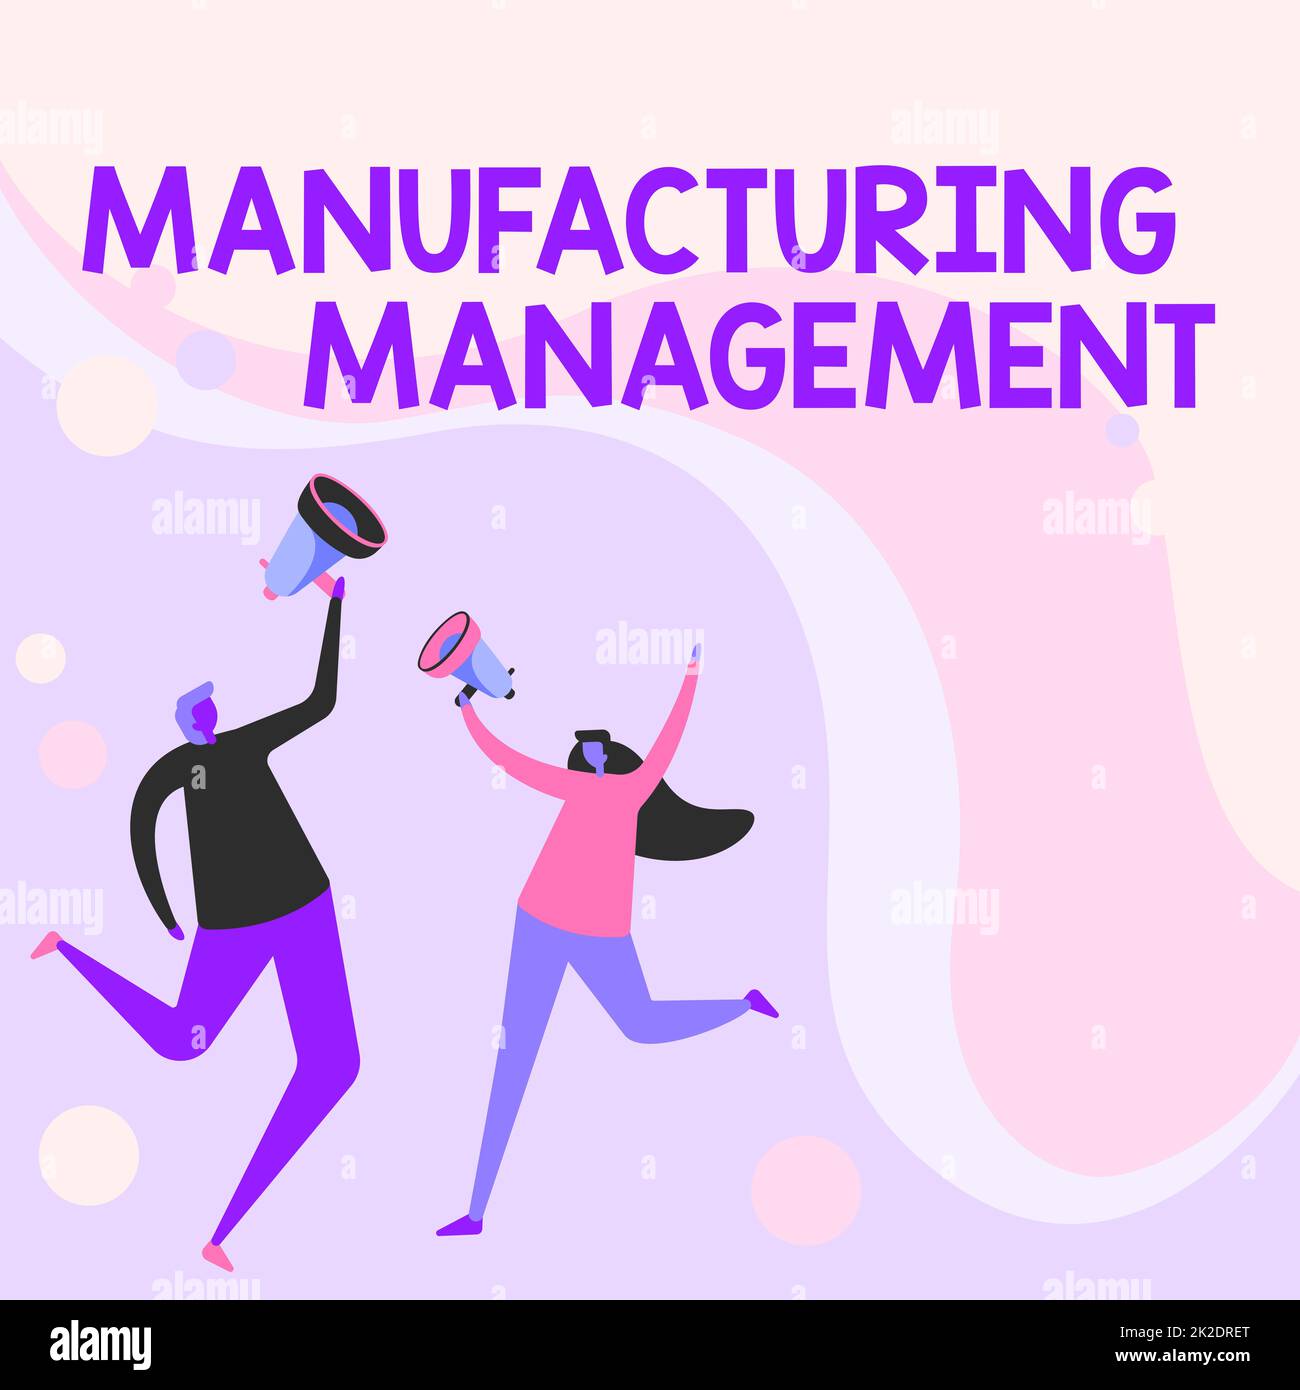 Inspiration showing sign Manufacturing Management. Business concept methods used to define how products manufactured Illustration Of Partners Jumping Around Sharing Thoughts Through Megaphone. Stock Photo